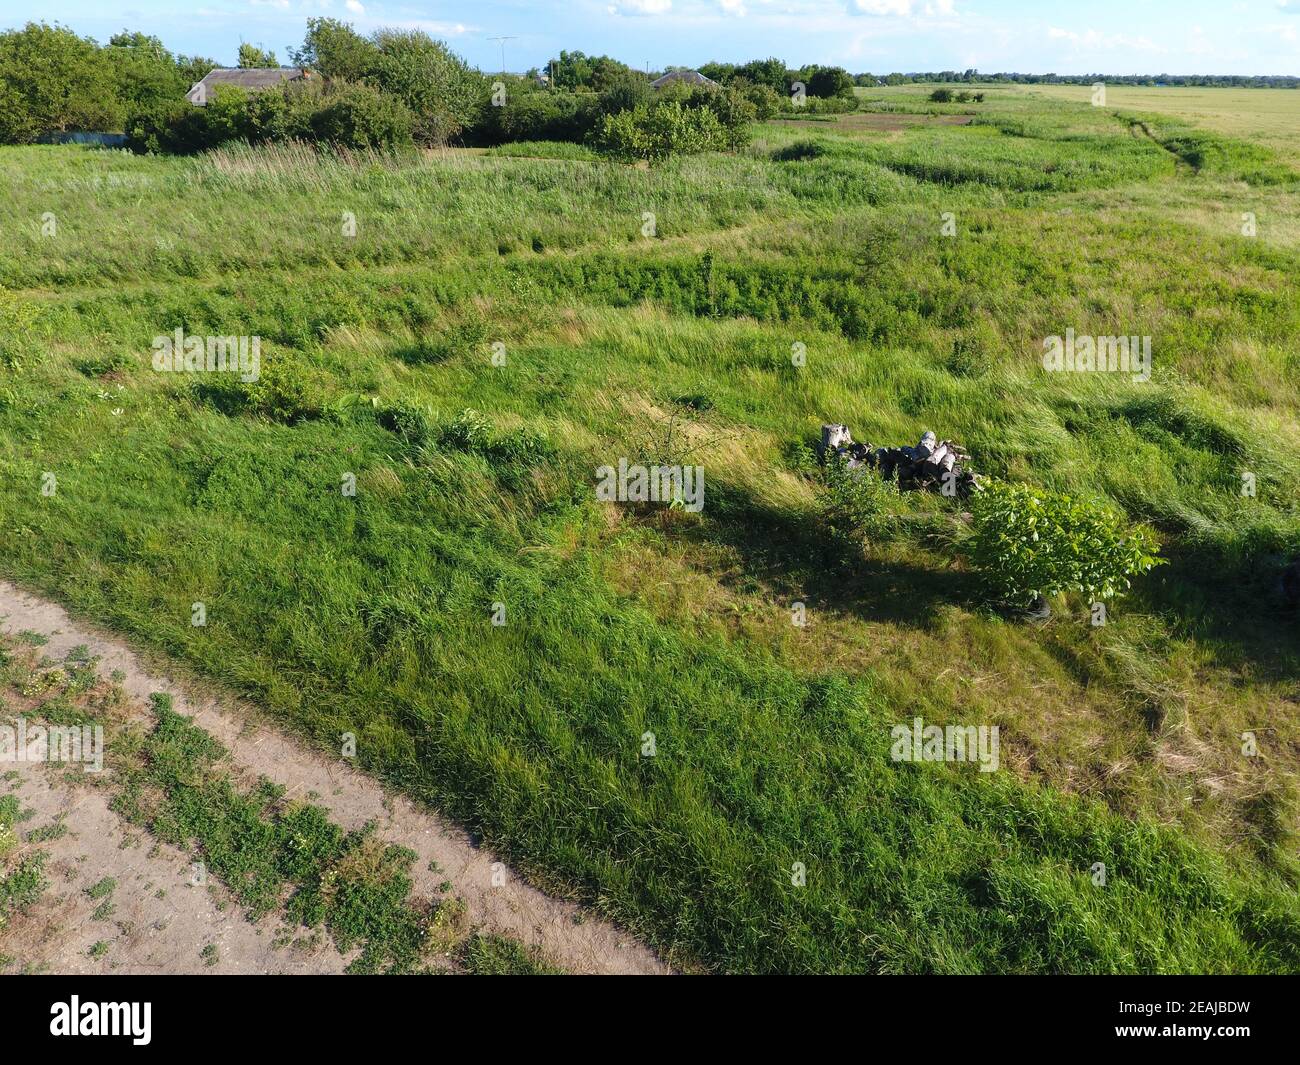 The site is overgrown with grass. Weed vegetation on non-plowed soil. Stock Photo